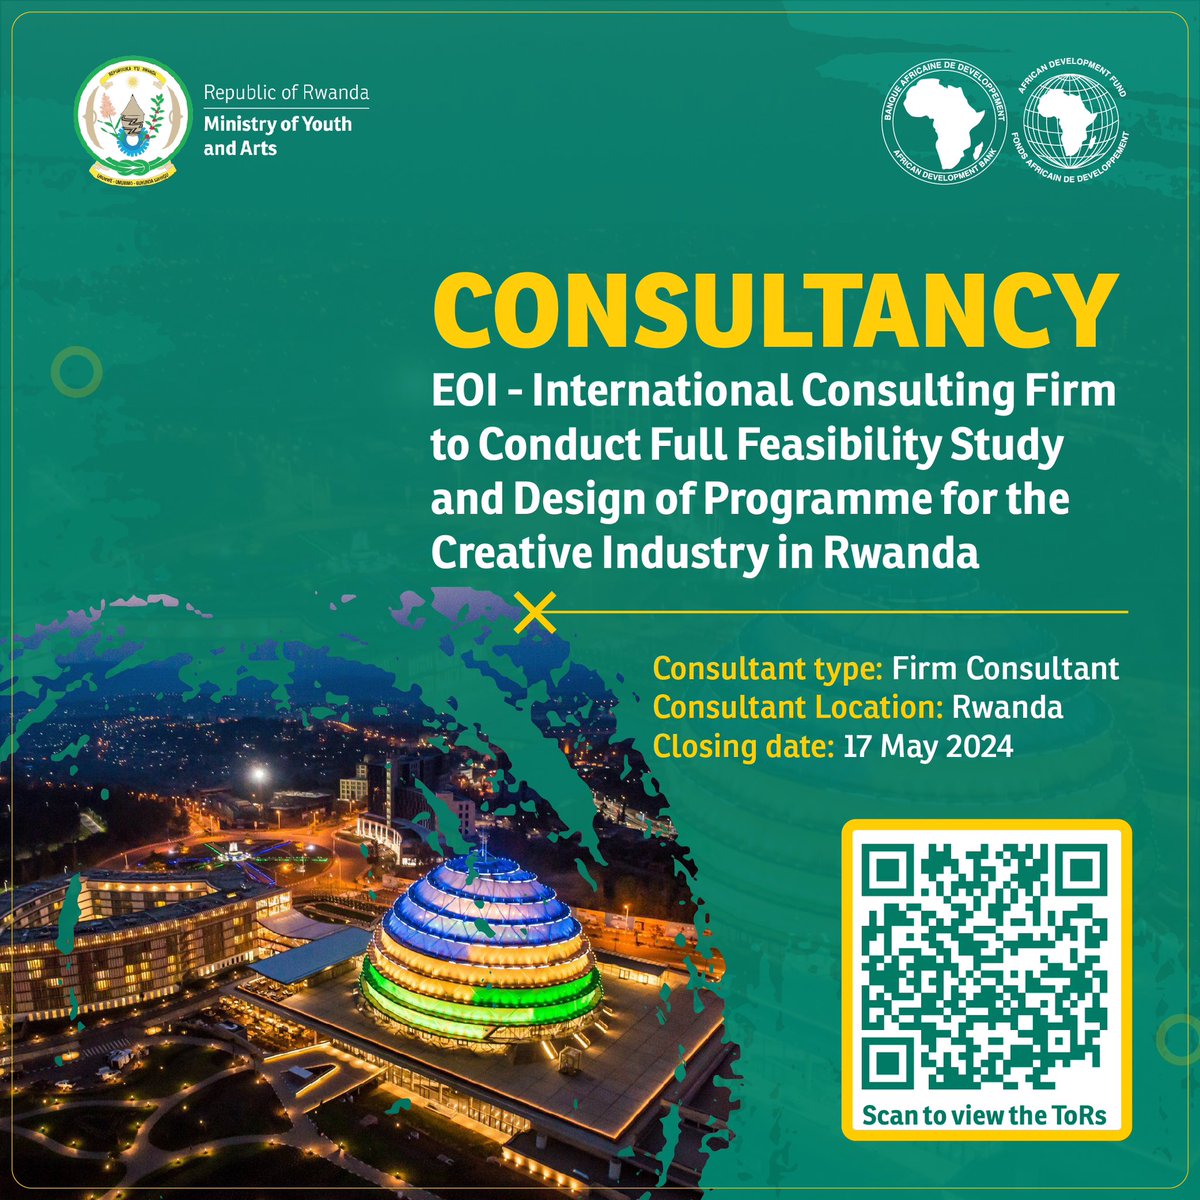 🚨The Ministry of Youth and Arts in collaboration with @AfDB_Group is seeking an international consulting firm to conduct a full feasibility study and design a programme for the creative industry in Rwanda. ►Scan the QR code to view the ToRs. ►The link: bit.ly/3WwPmVq